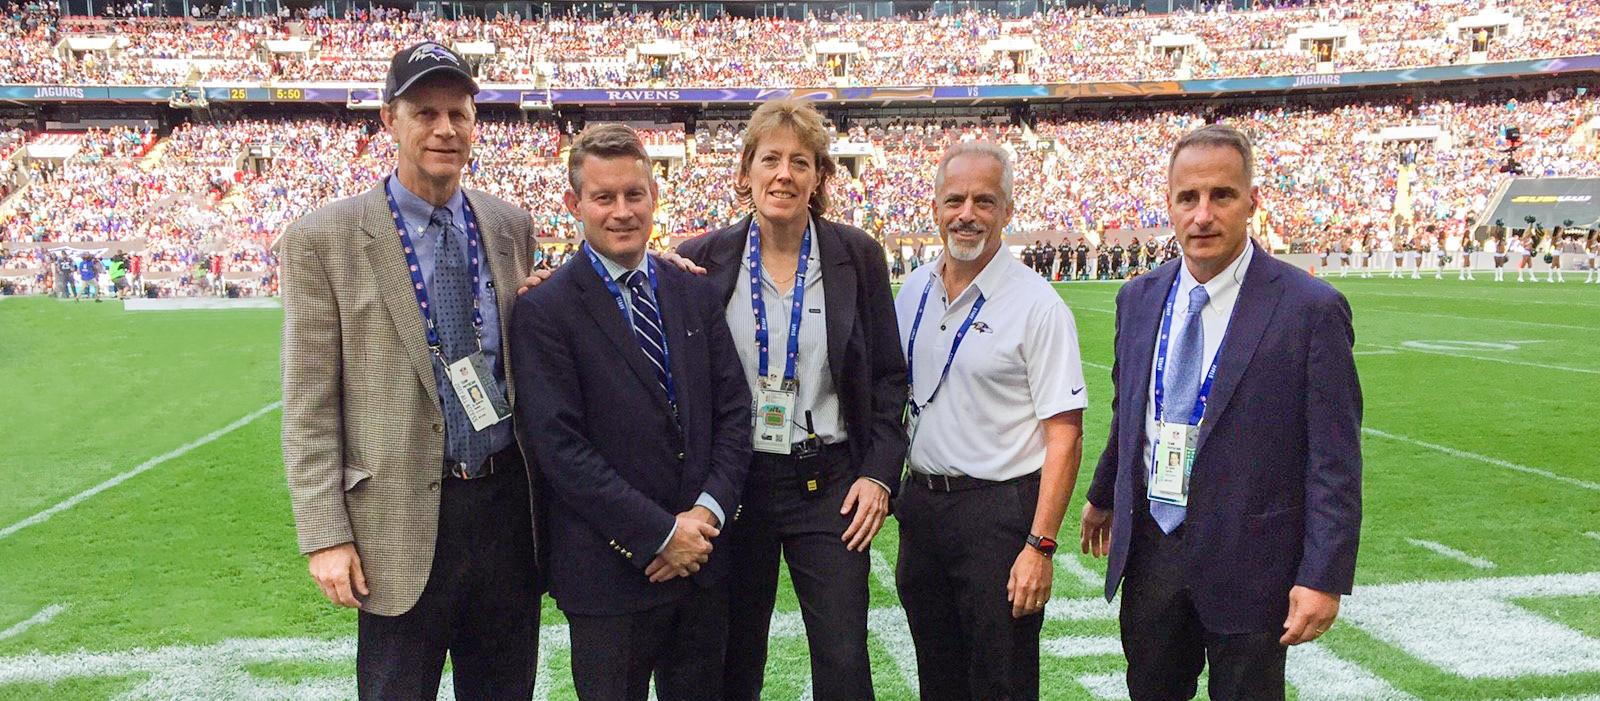 The MedStar Health physician team for the Baltimore Ravens football team poses for a photo on the field before a game.